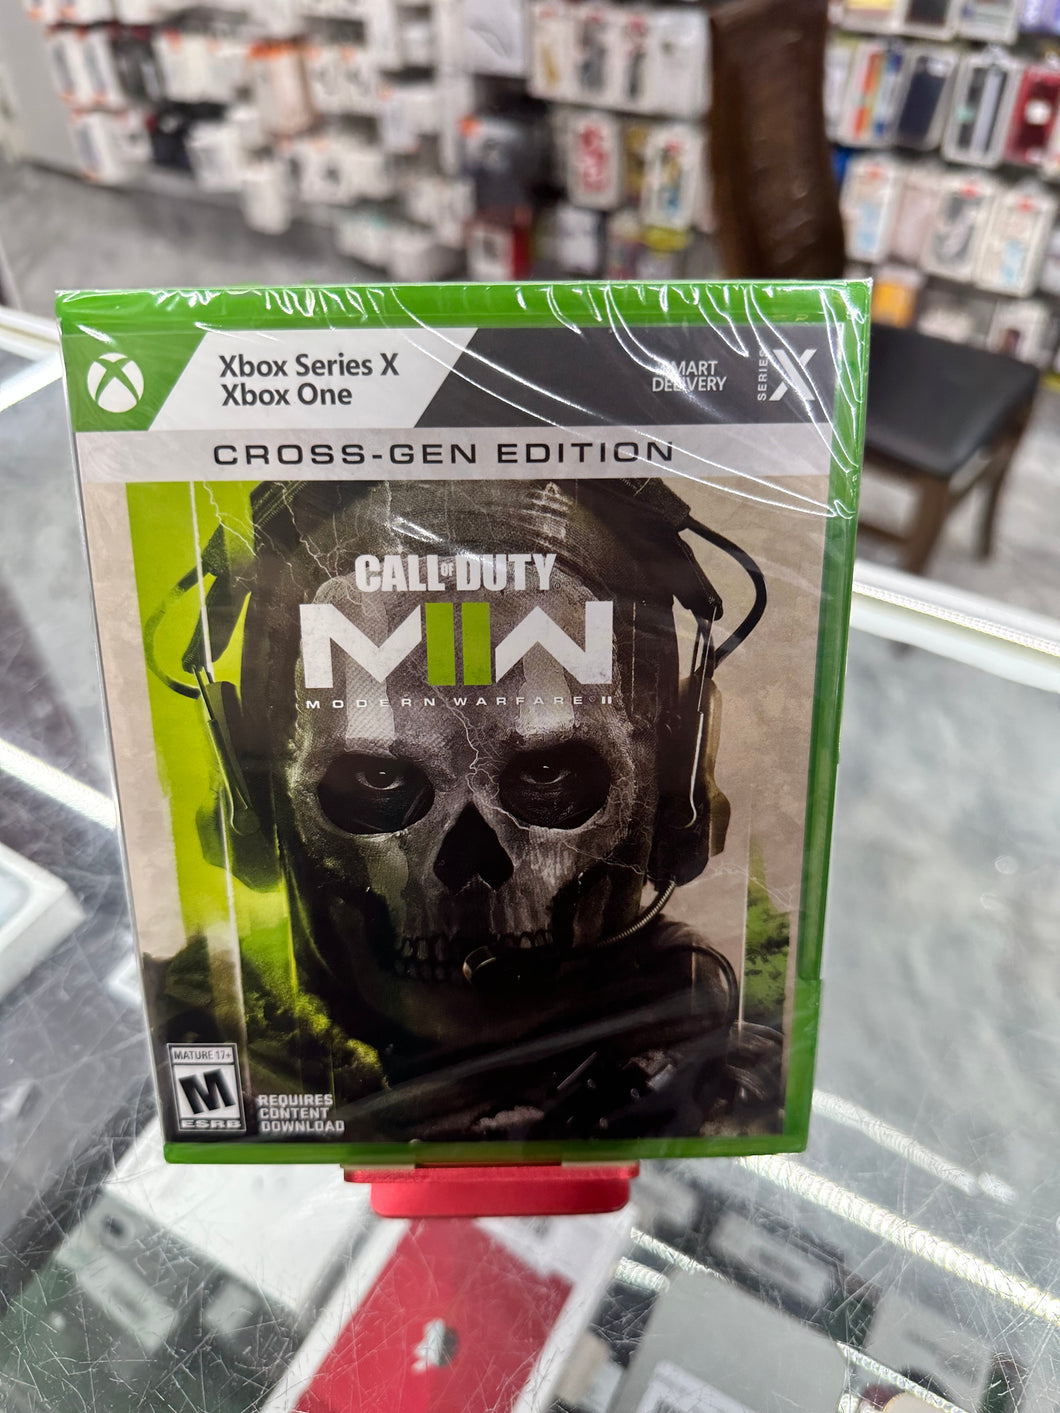 Call of duty MWII series x/one